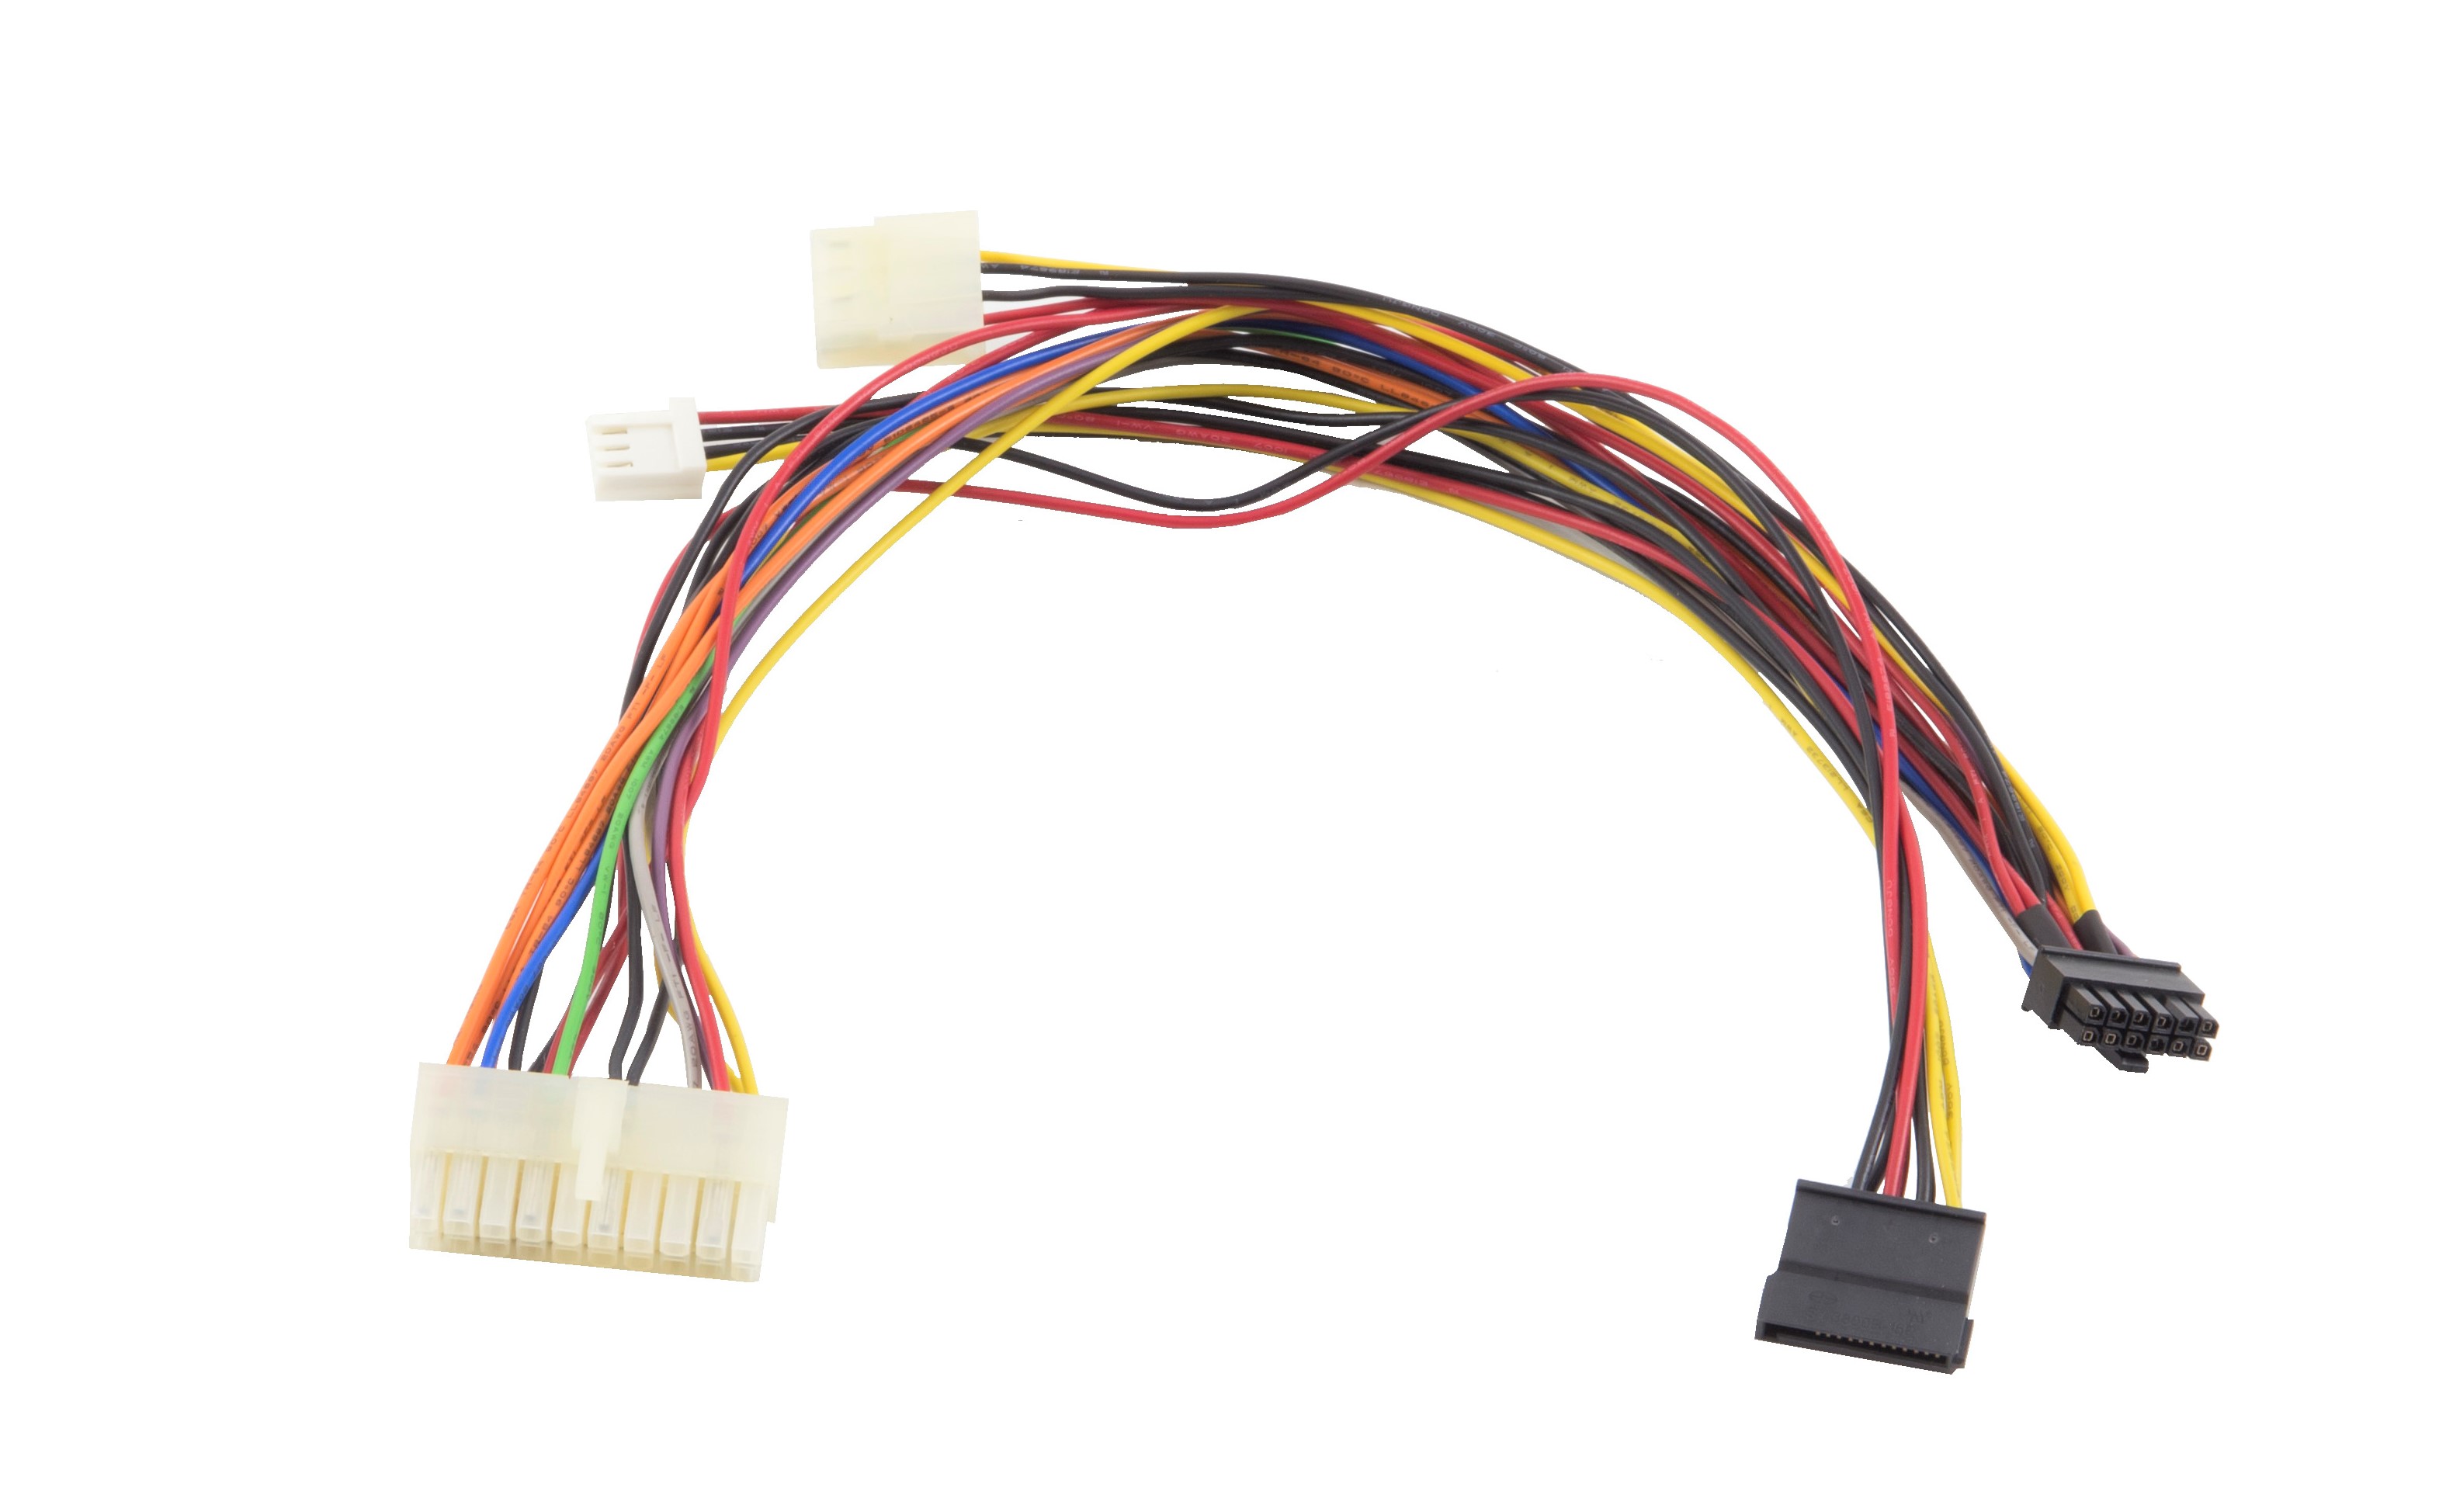 12-20 ATX+SATA CABLE  |Products|Accessories|Cable & Cord